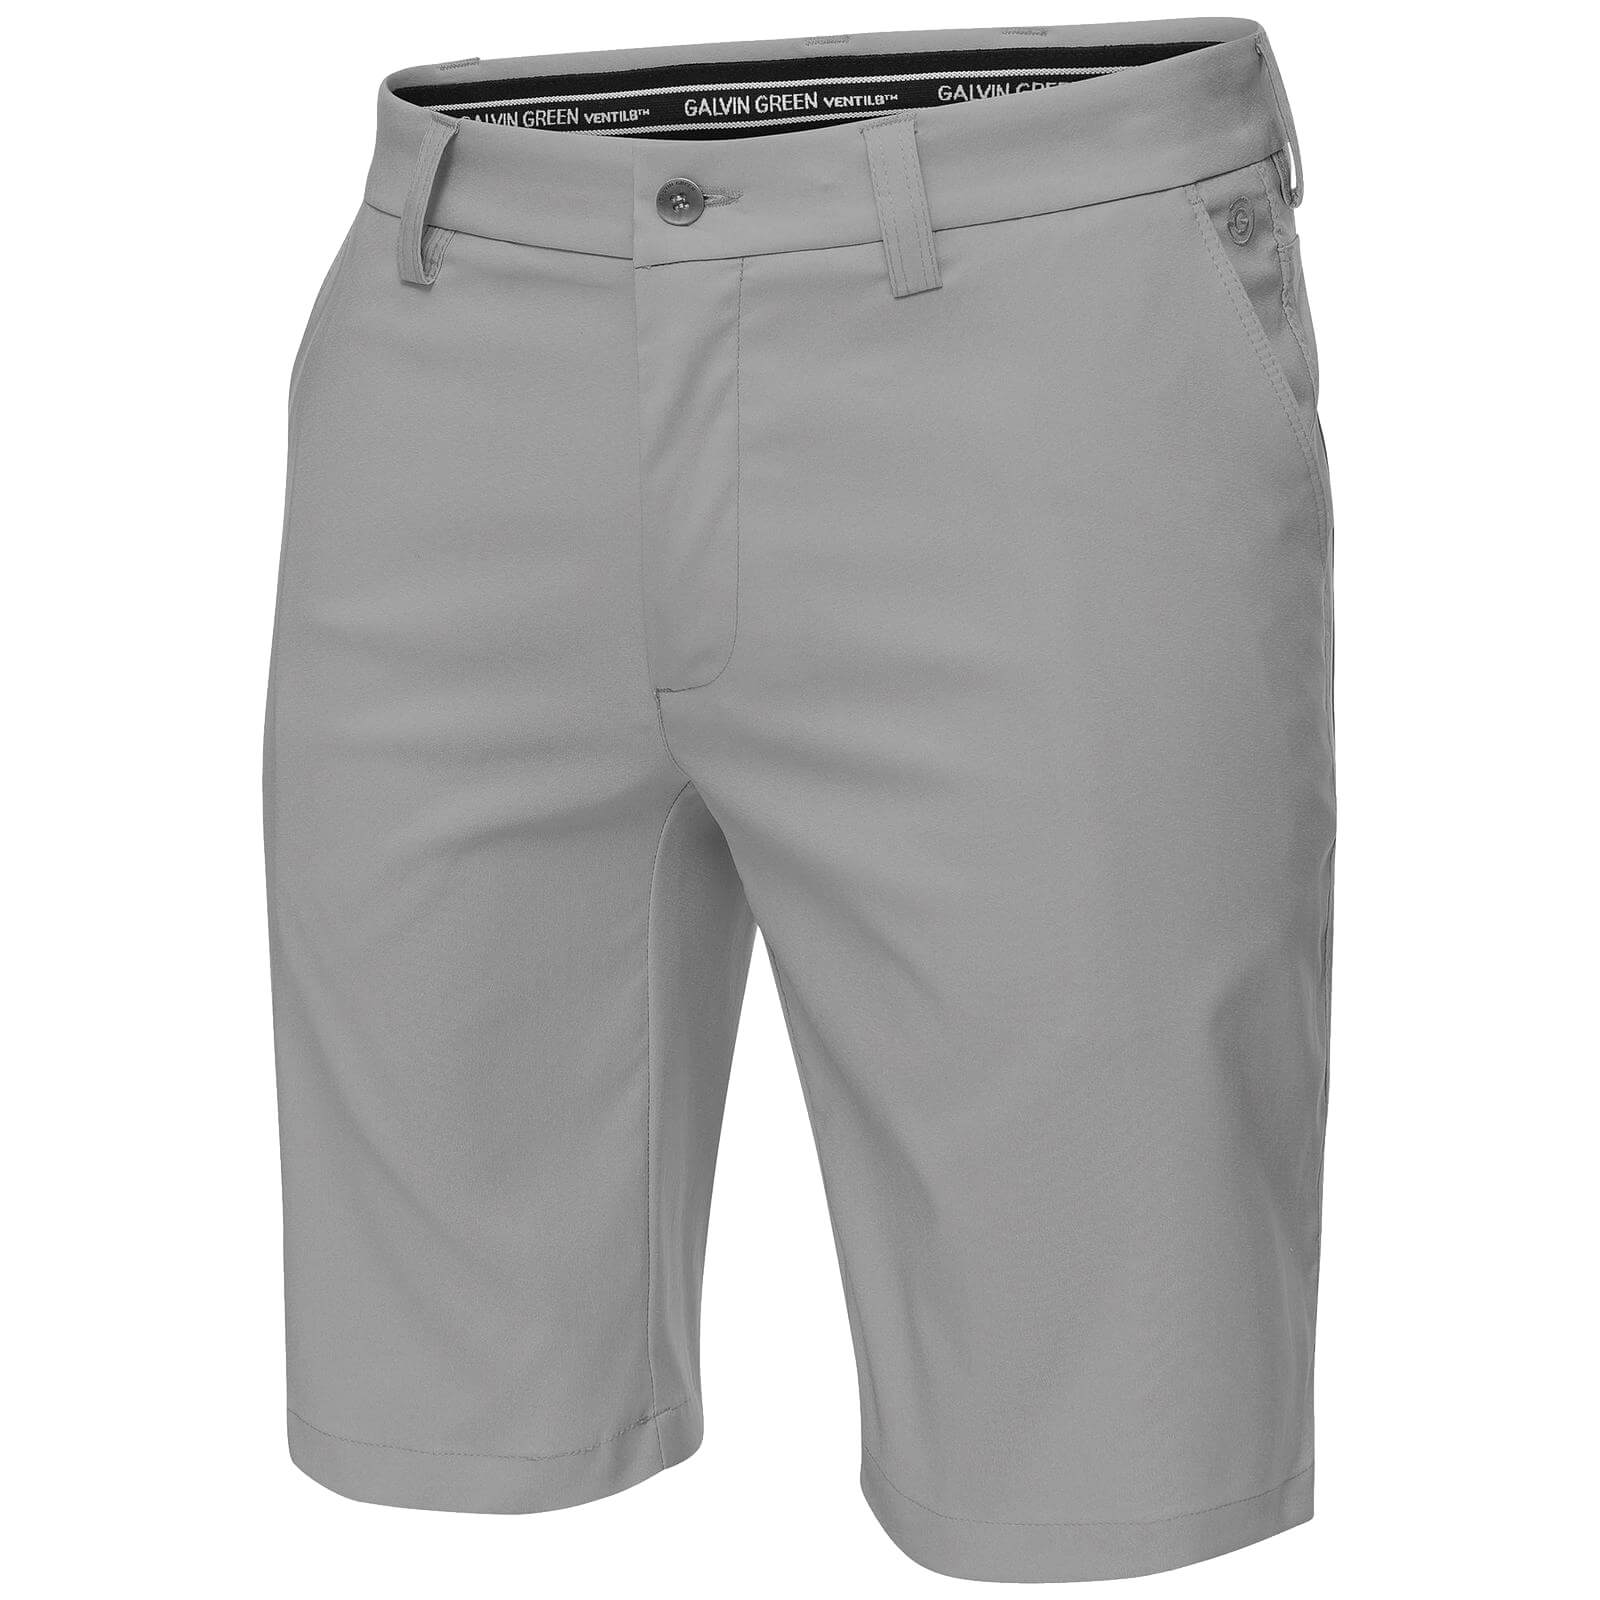 Galvin Green Paolo Ventil8 Golf Shorts 2021